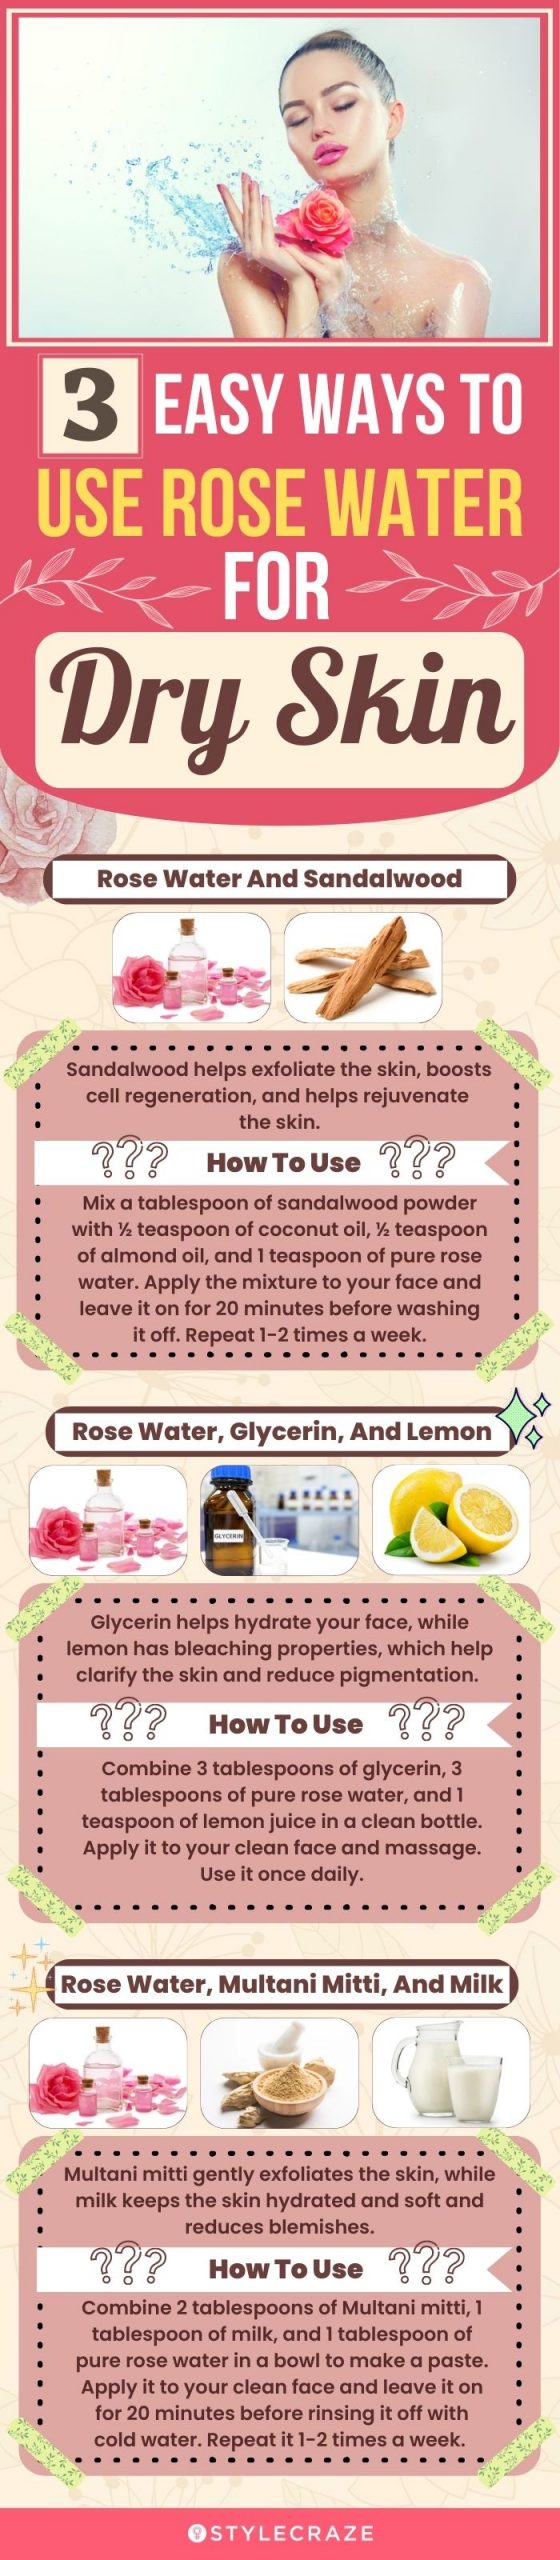 3 easy ways to use rose water for dry skin (infographic)